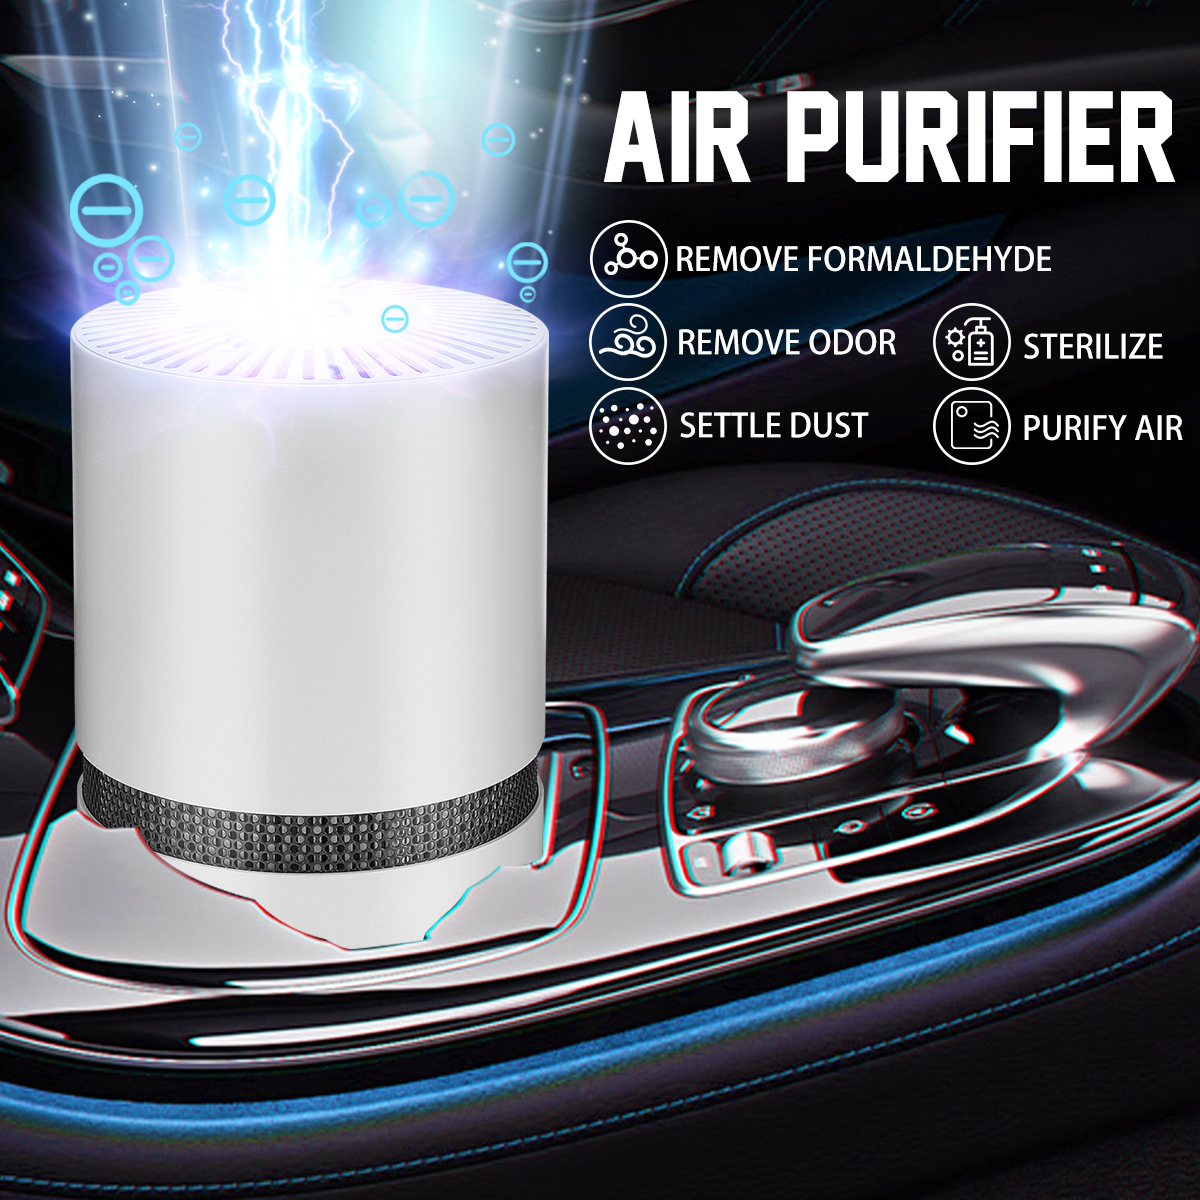 Negative-Ion-Air-Purifier-HEPA-Filter-Desktop-Air-Cleaner-For-Home-Office-Car-1631954-1